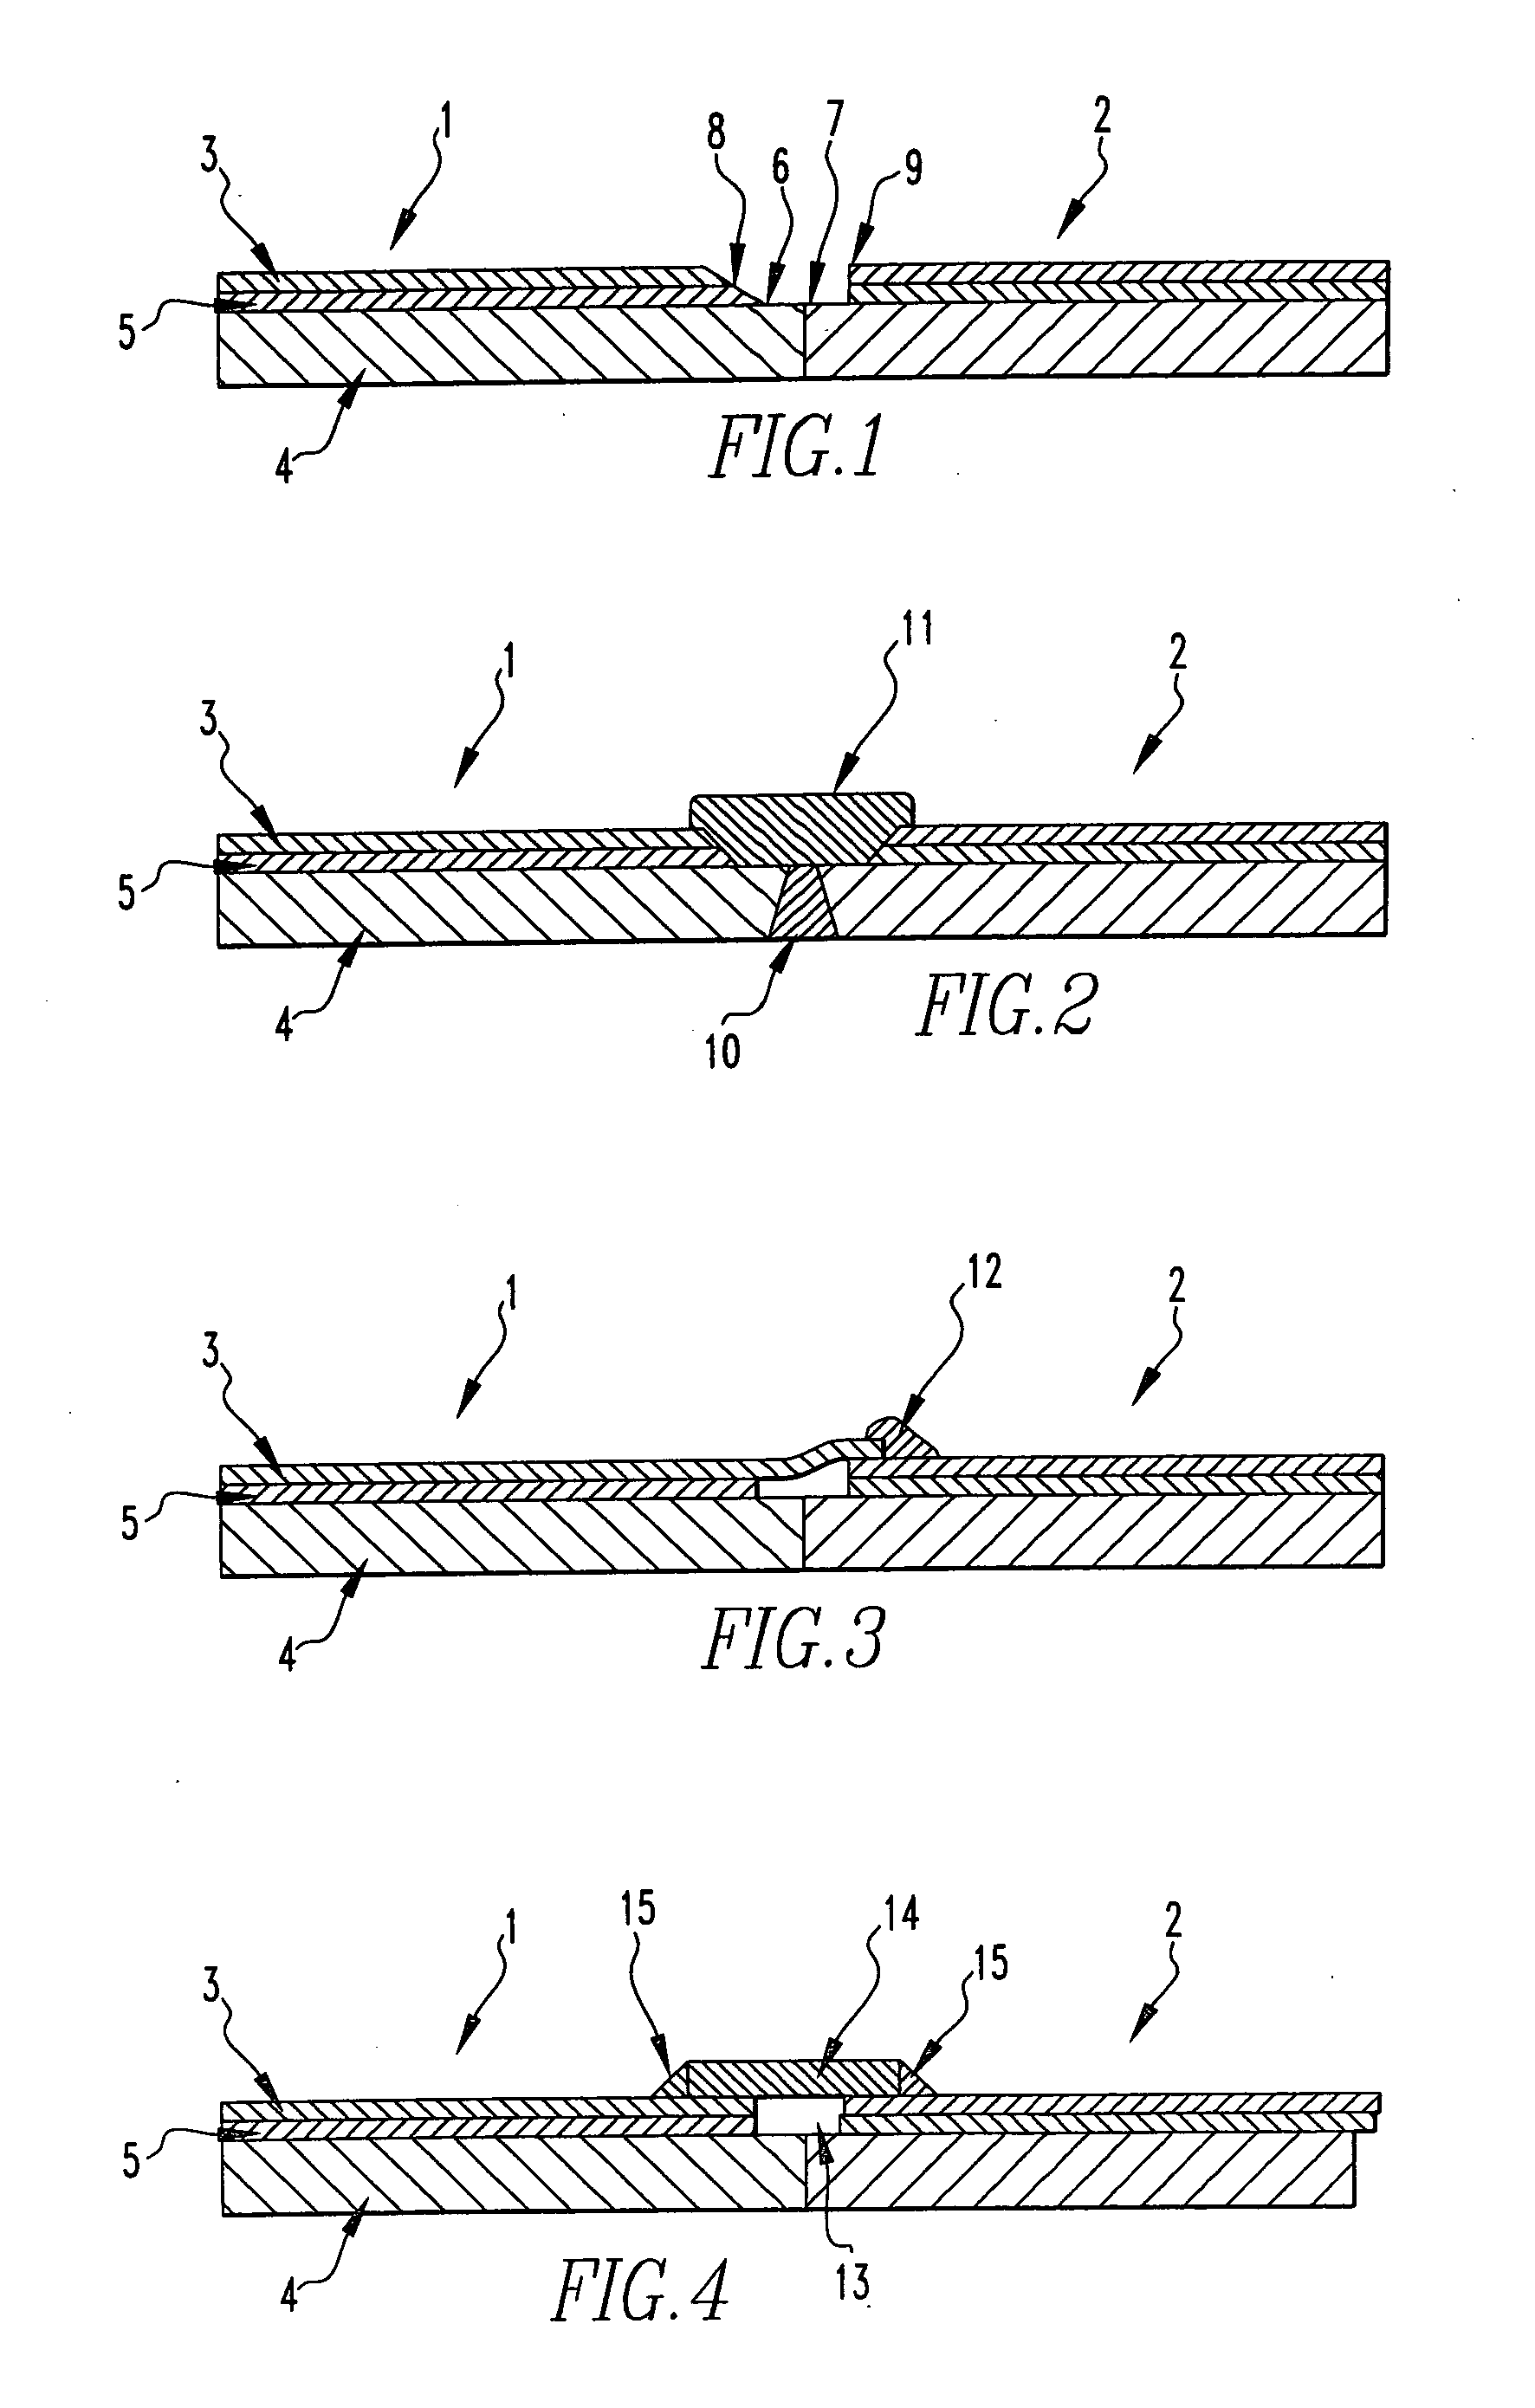 Method of joining tantalum clade steel structures